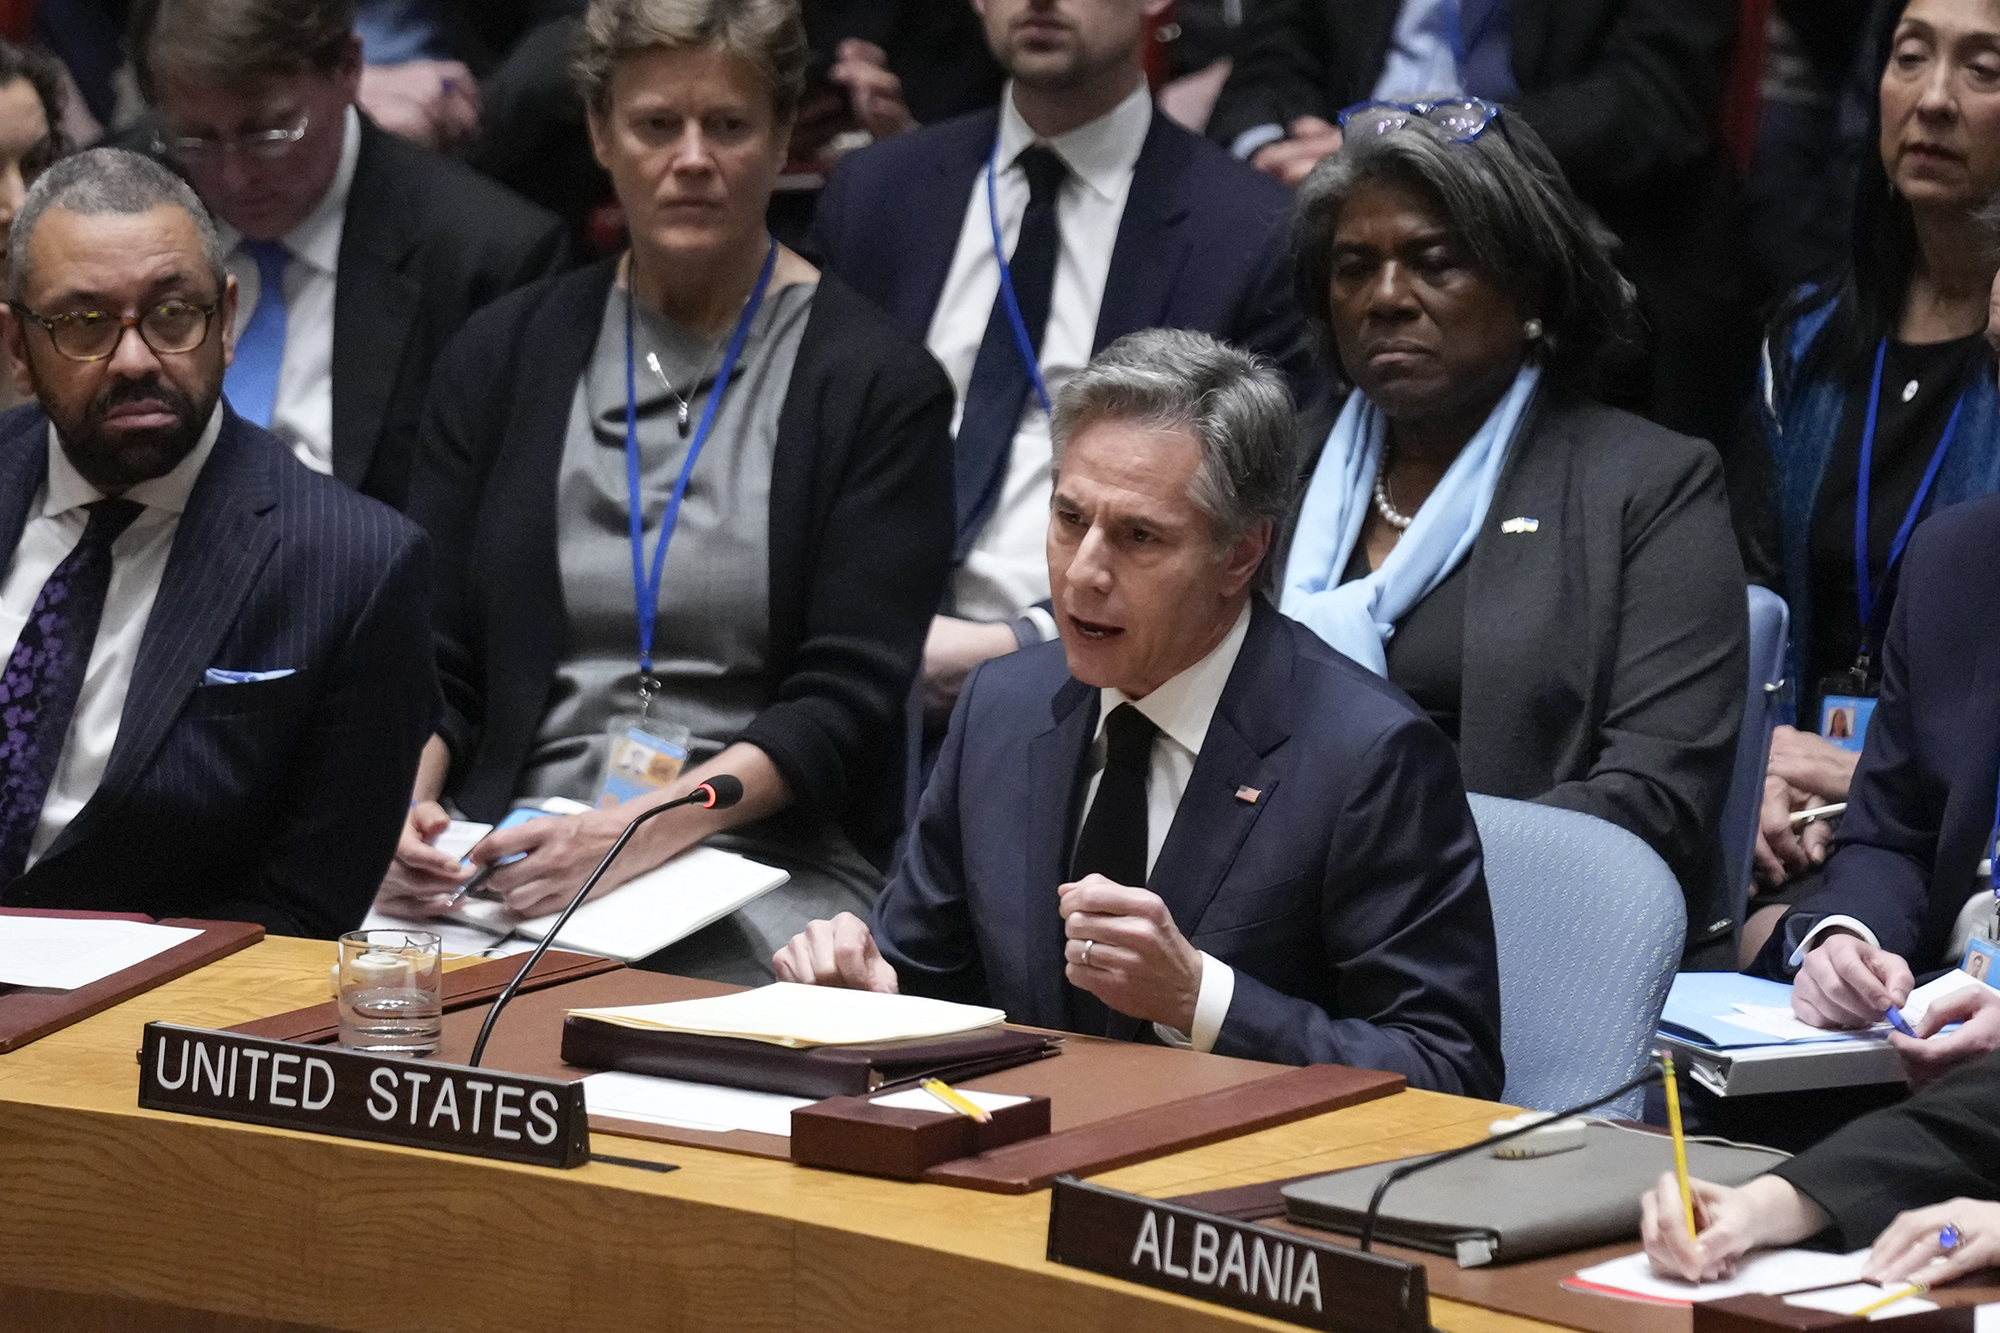 United States Secretary of State Antony Blinken speaks during a Security Council meeting at United Nations headquarters, New York, on February 24.